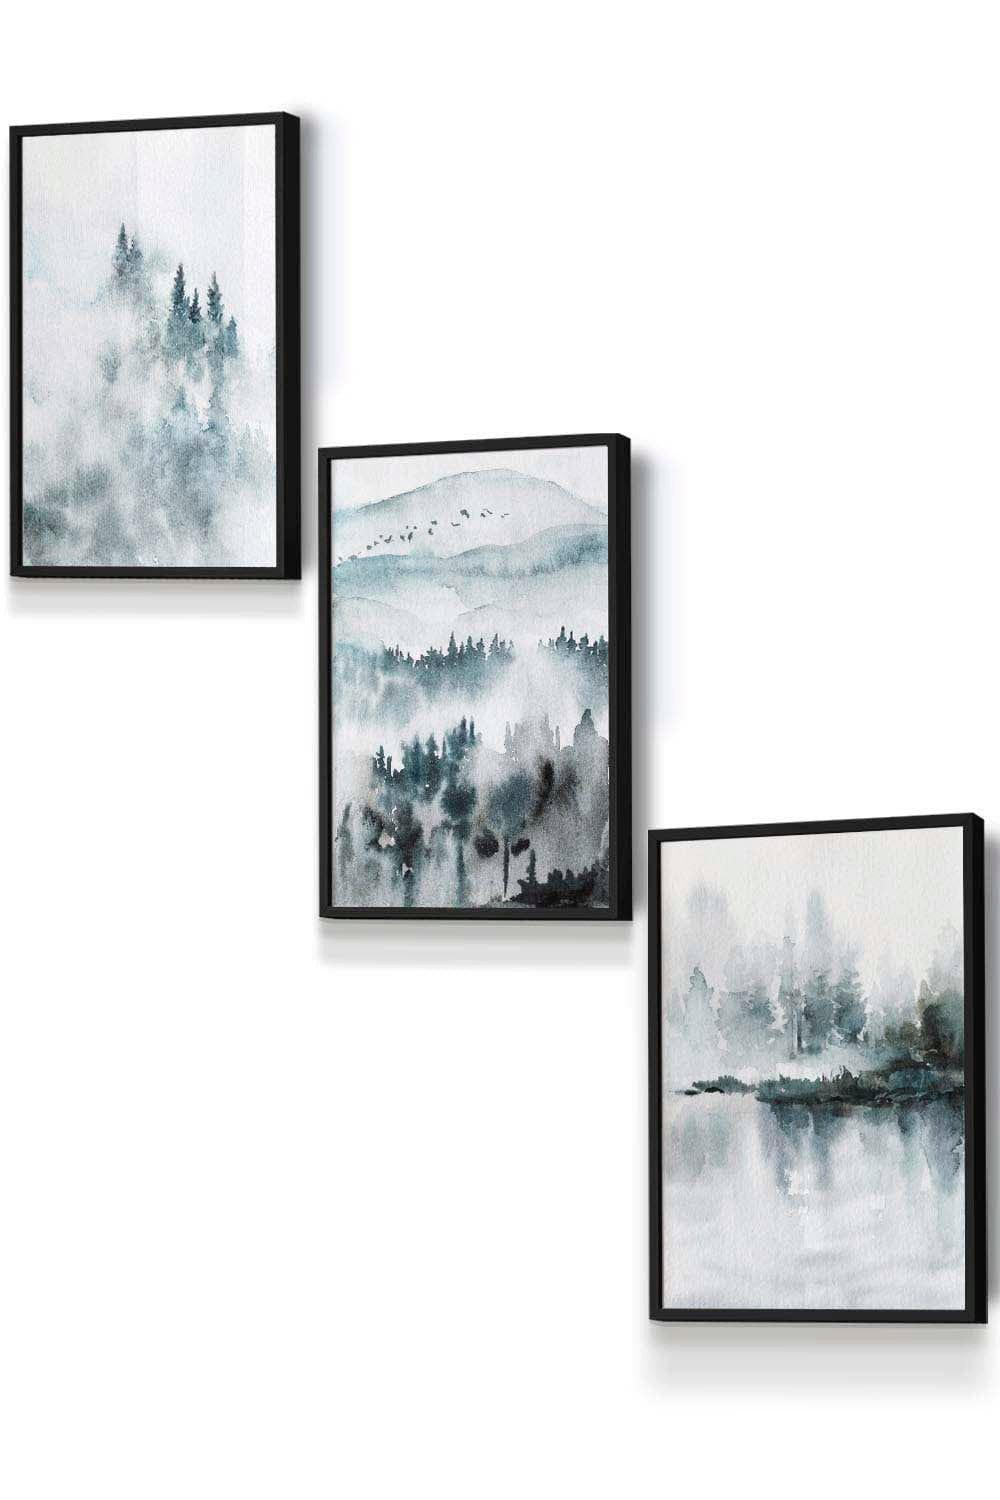 Set of 3 Black Framed Teal Blue Abstract Forest Lake Wall Art